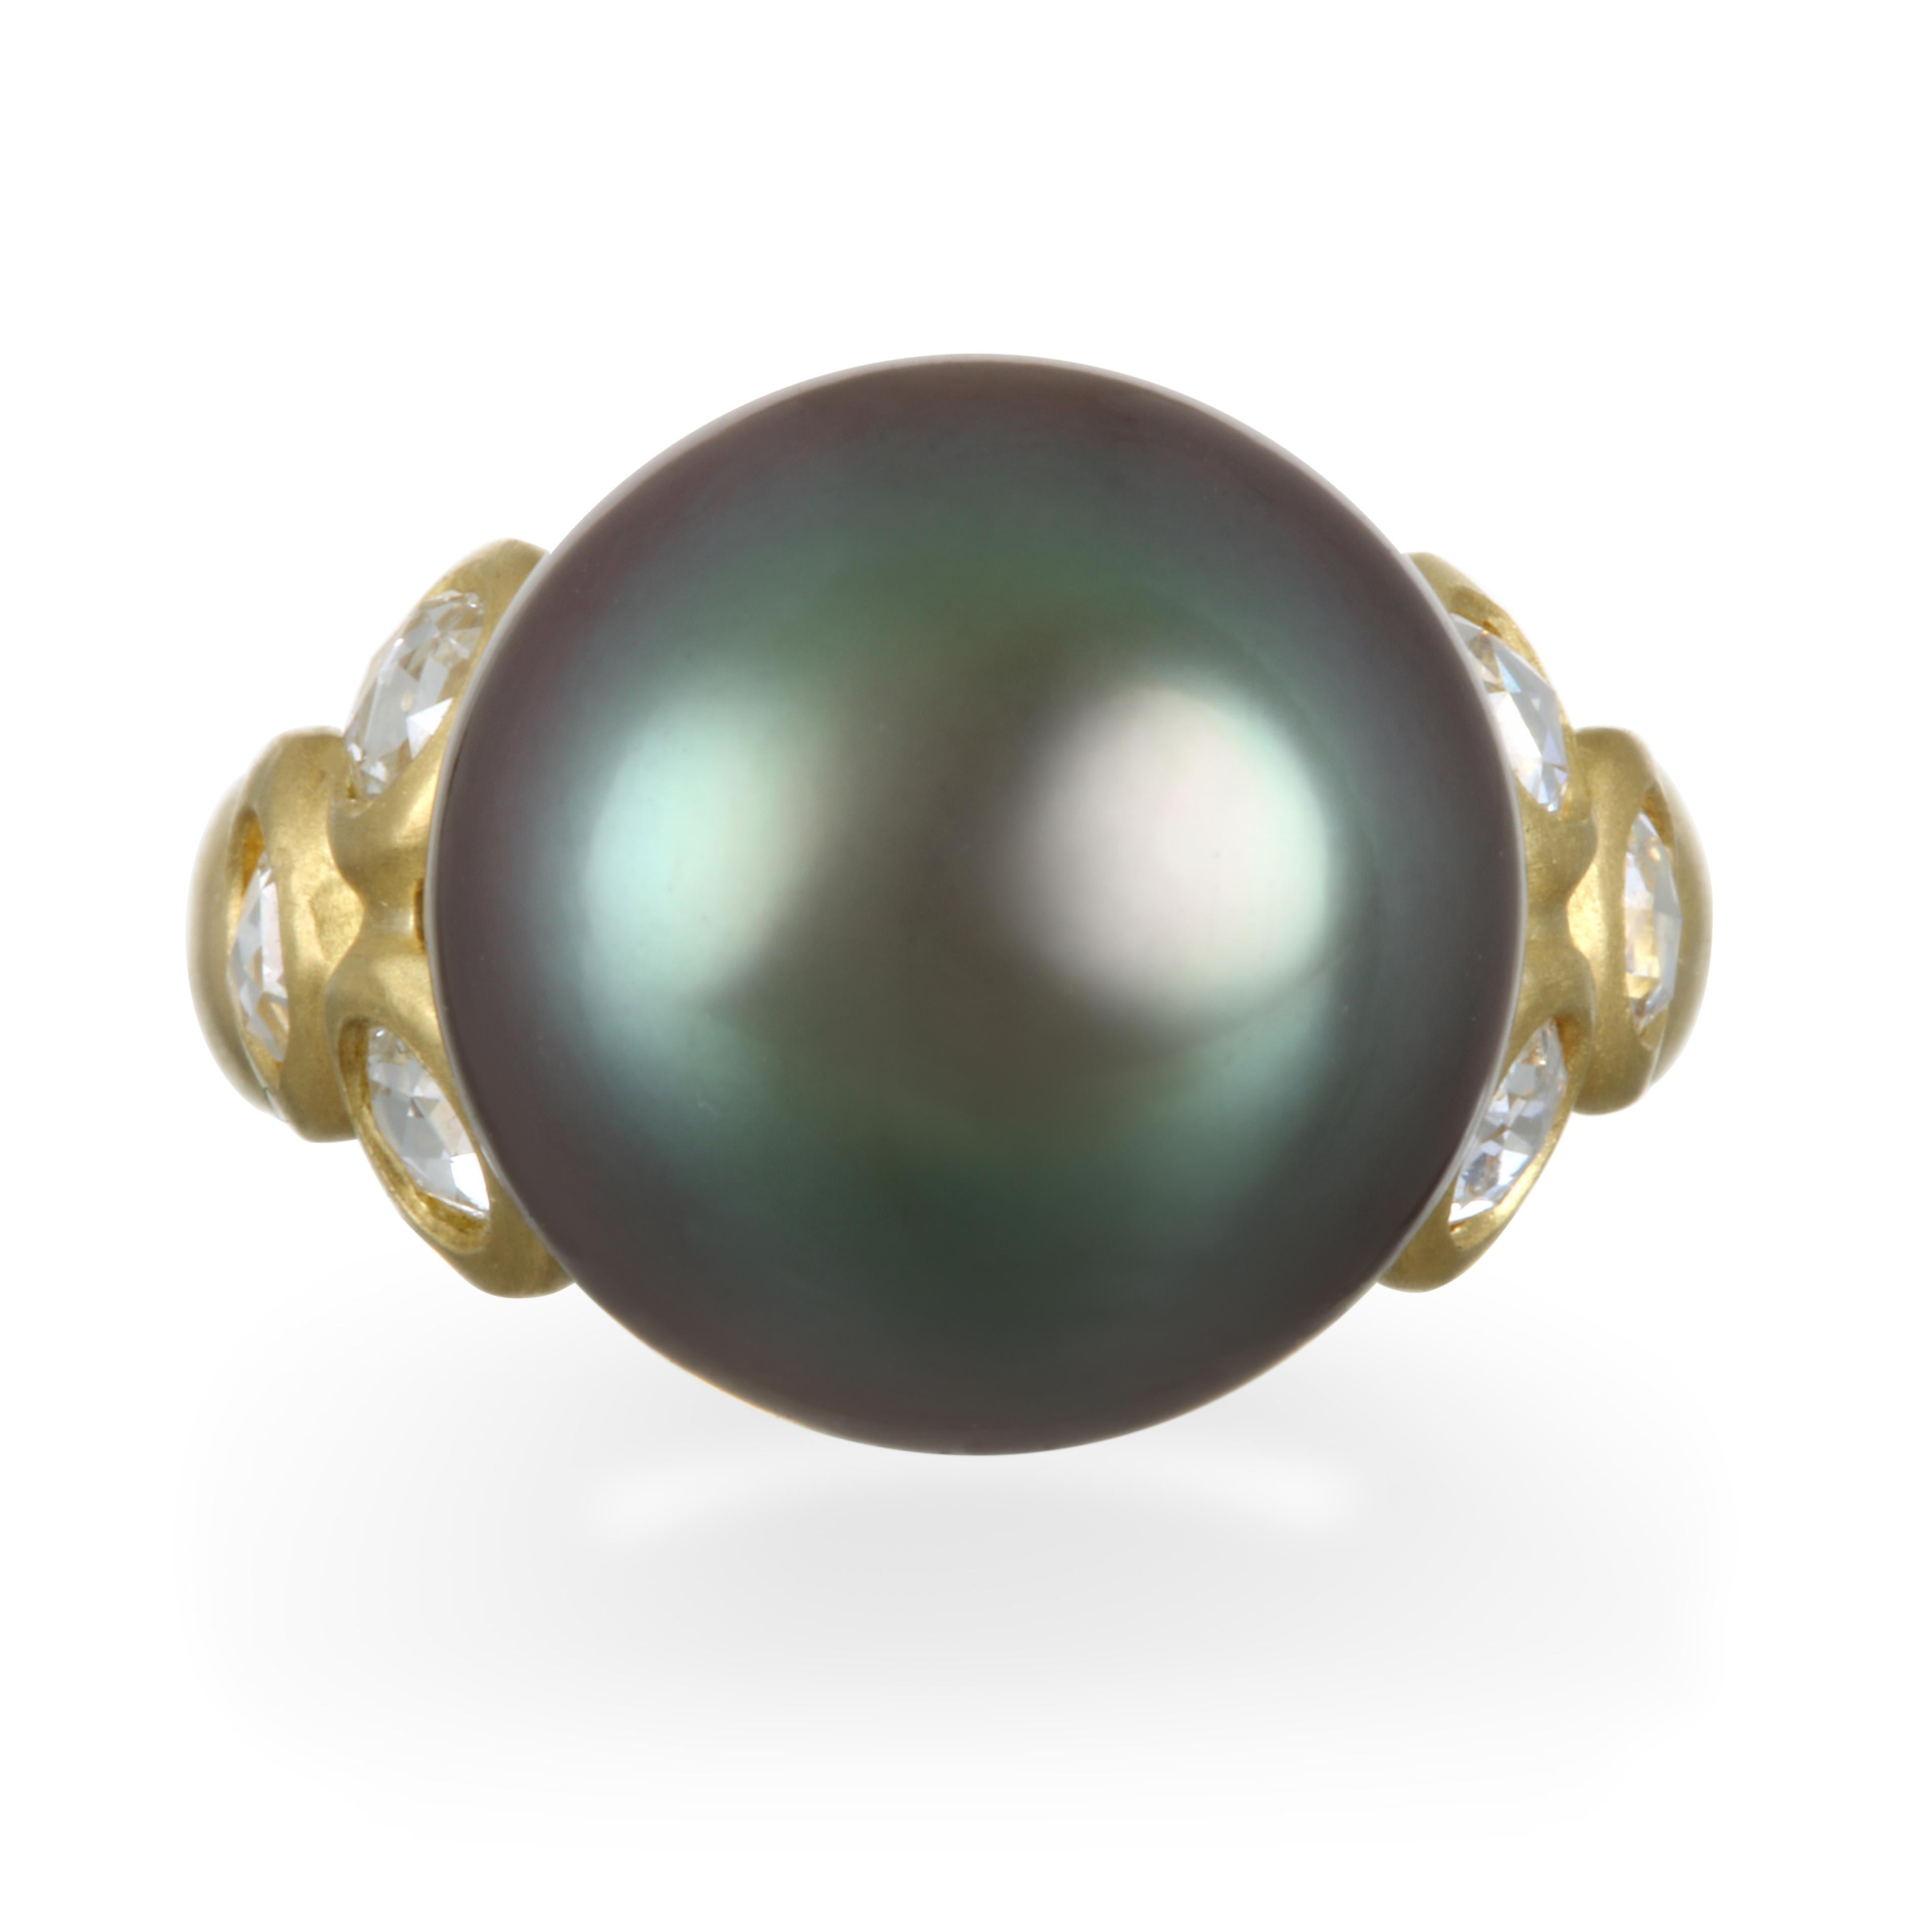 Faye Kim 18k Gold South Sea Tahitian Pearl and Diamond Cocktail Ring

White rose cut diamonds showcase this beautiful jumbo South Sea Tahitian pearl.  Meticulously handcrafted setting in 18k gold, matte finish. 

Size 7
6 White Rose Cut Diamonds =